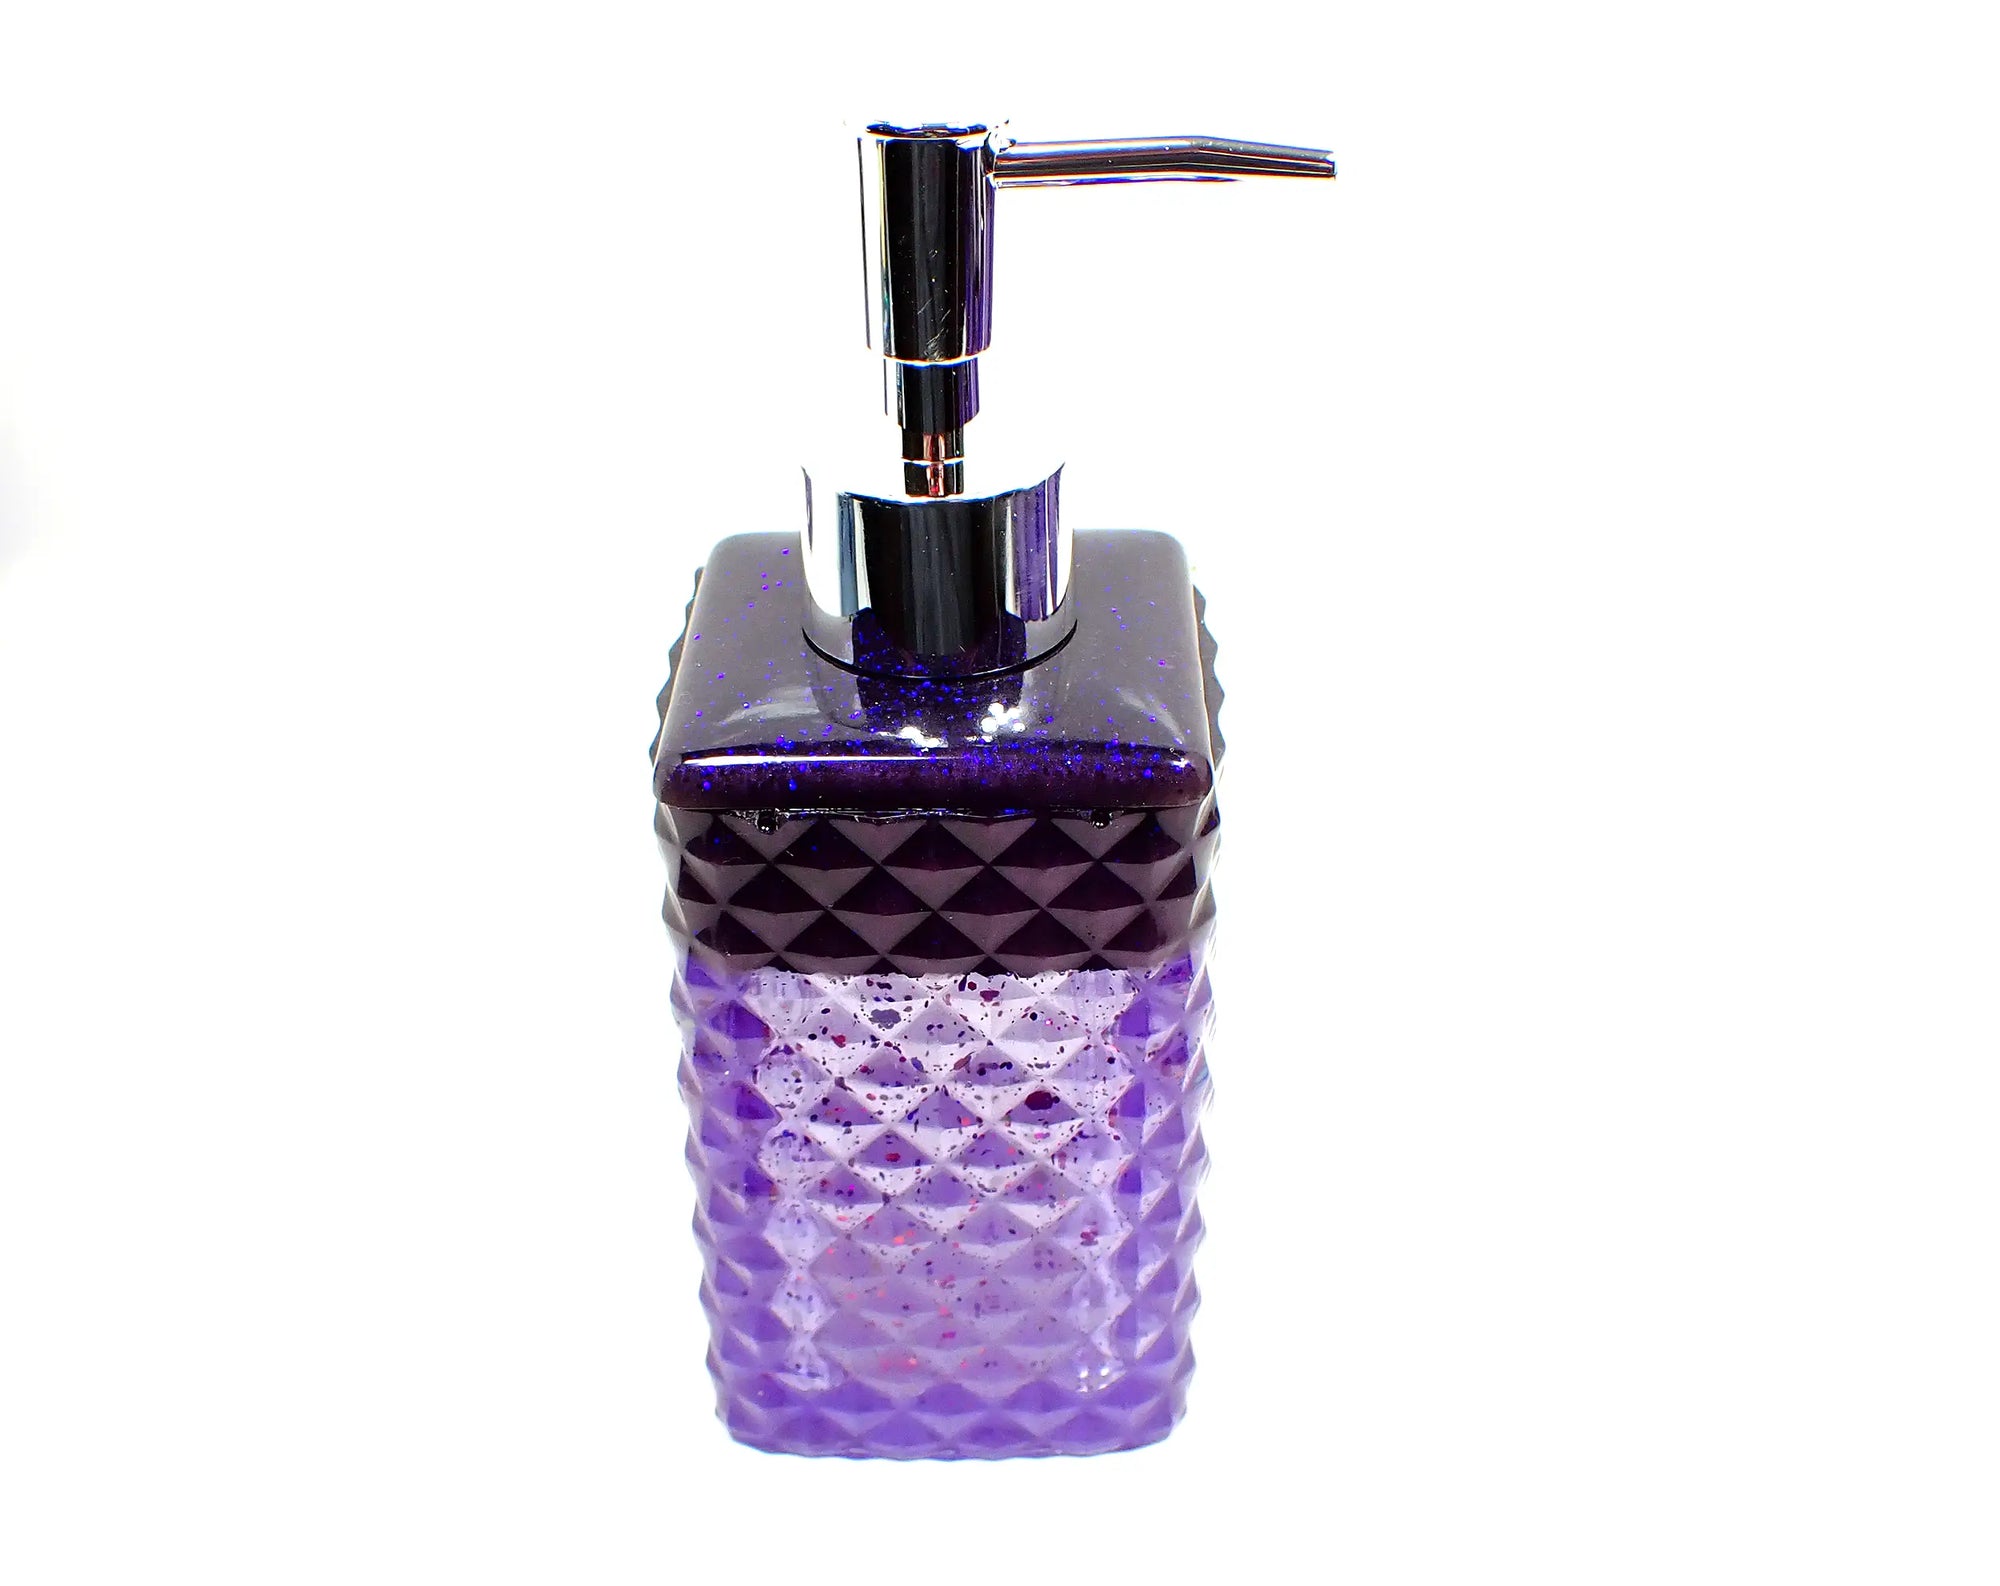 Faceted Square Handmade Pearly Purple and Glitter Resin Soap Dispenser, Lotion Dispenser